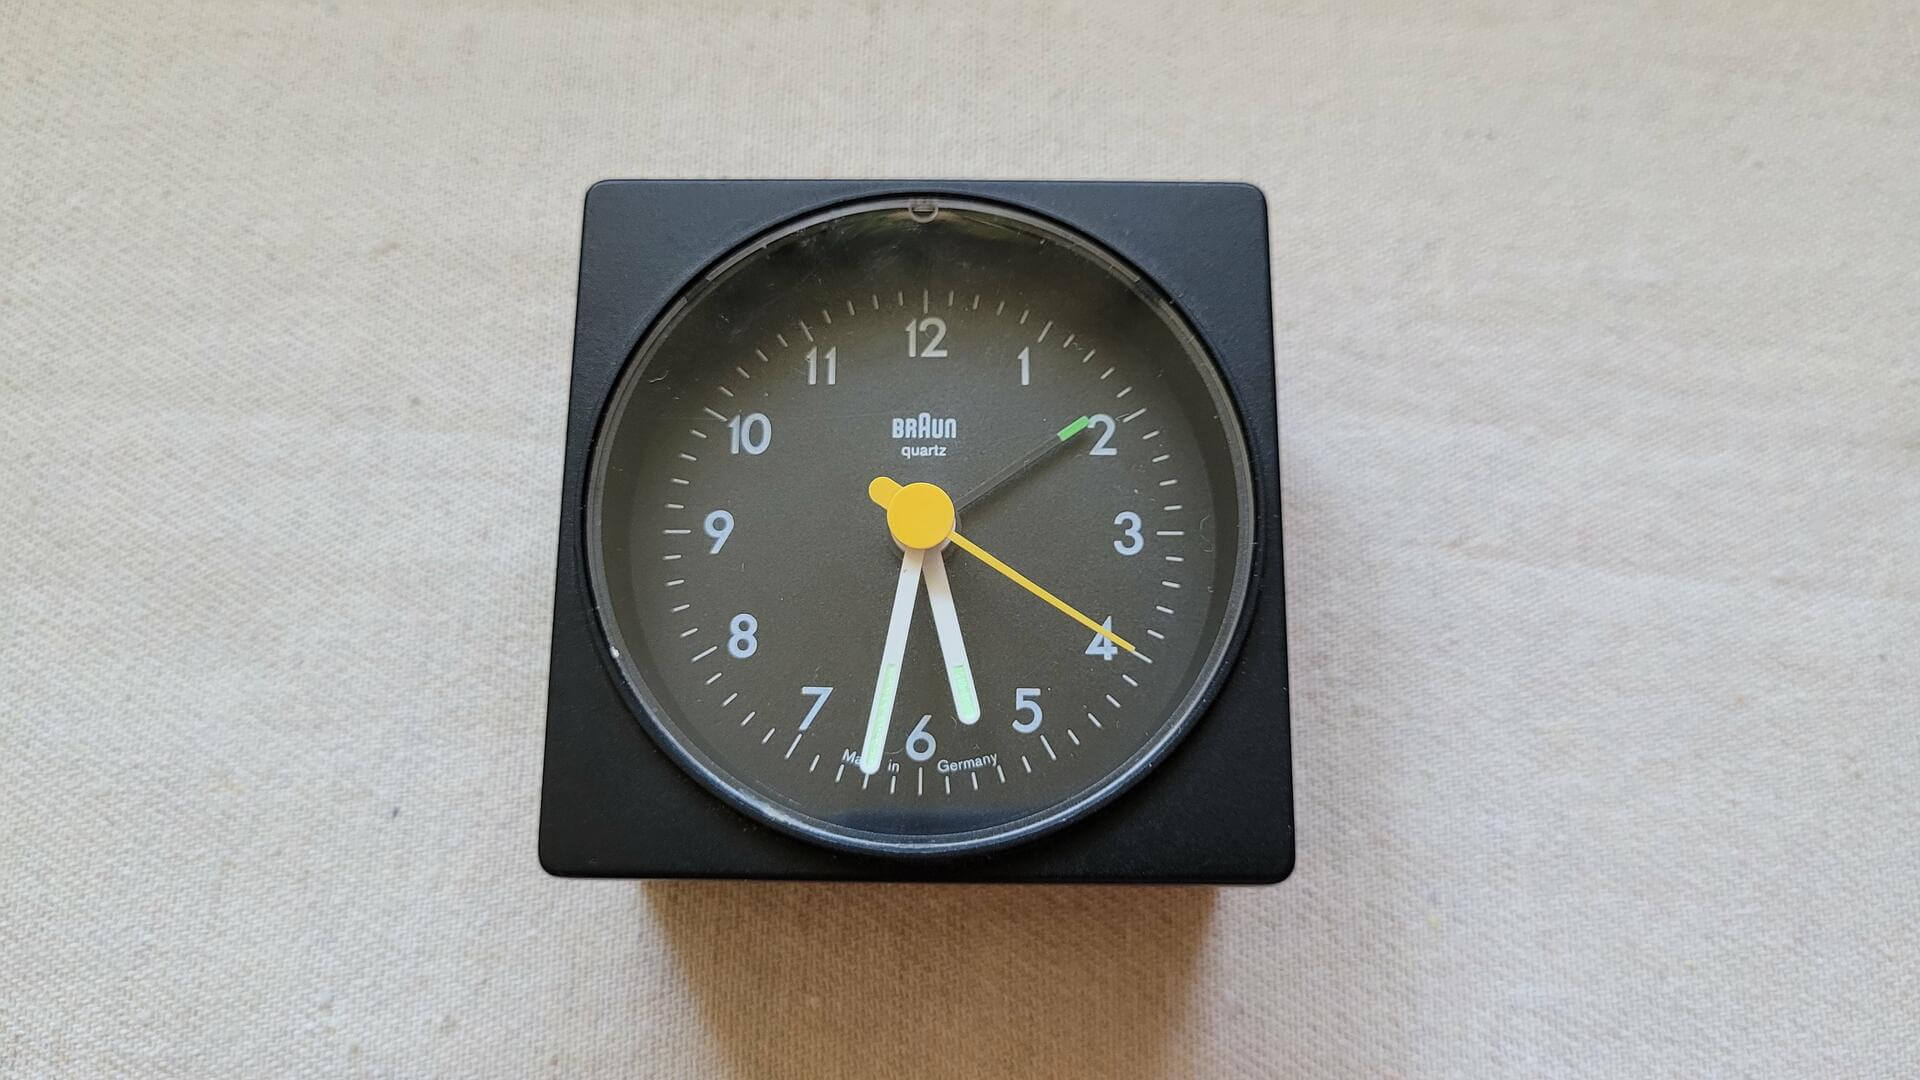 Rare retro 1987 Braun AG 4746 AB1 travel alarm analog clock designed by Dietrich Lubs under the supervision of Dieter Rams who was the head of design at Braun from 1961–1995. This vintage made in Germany collectible mid century table clock